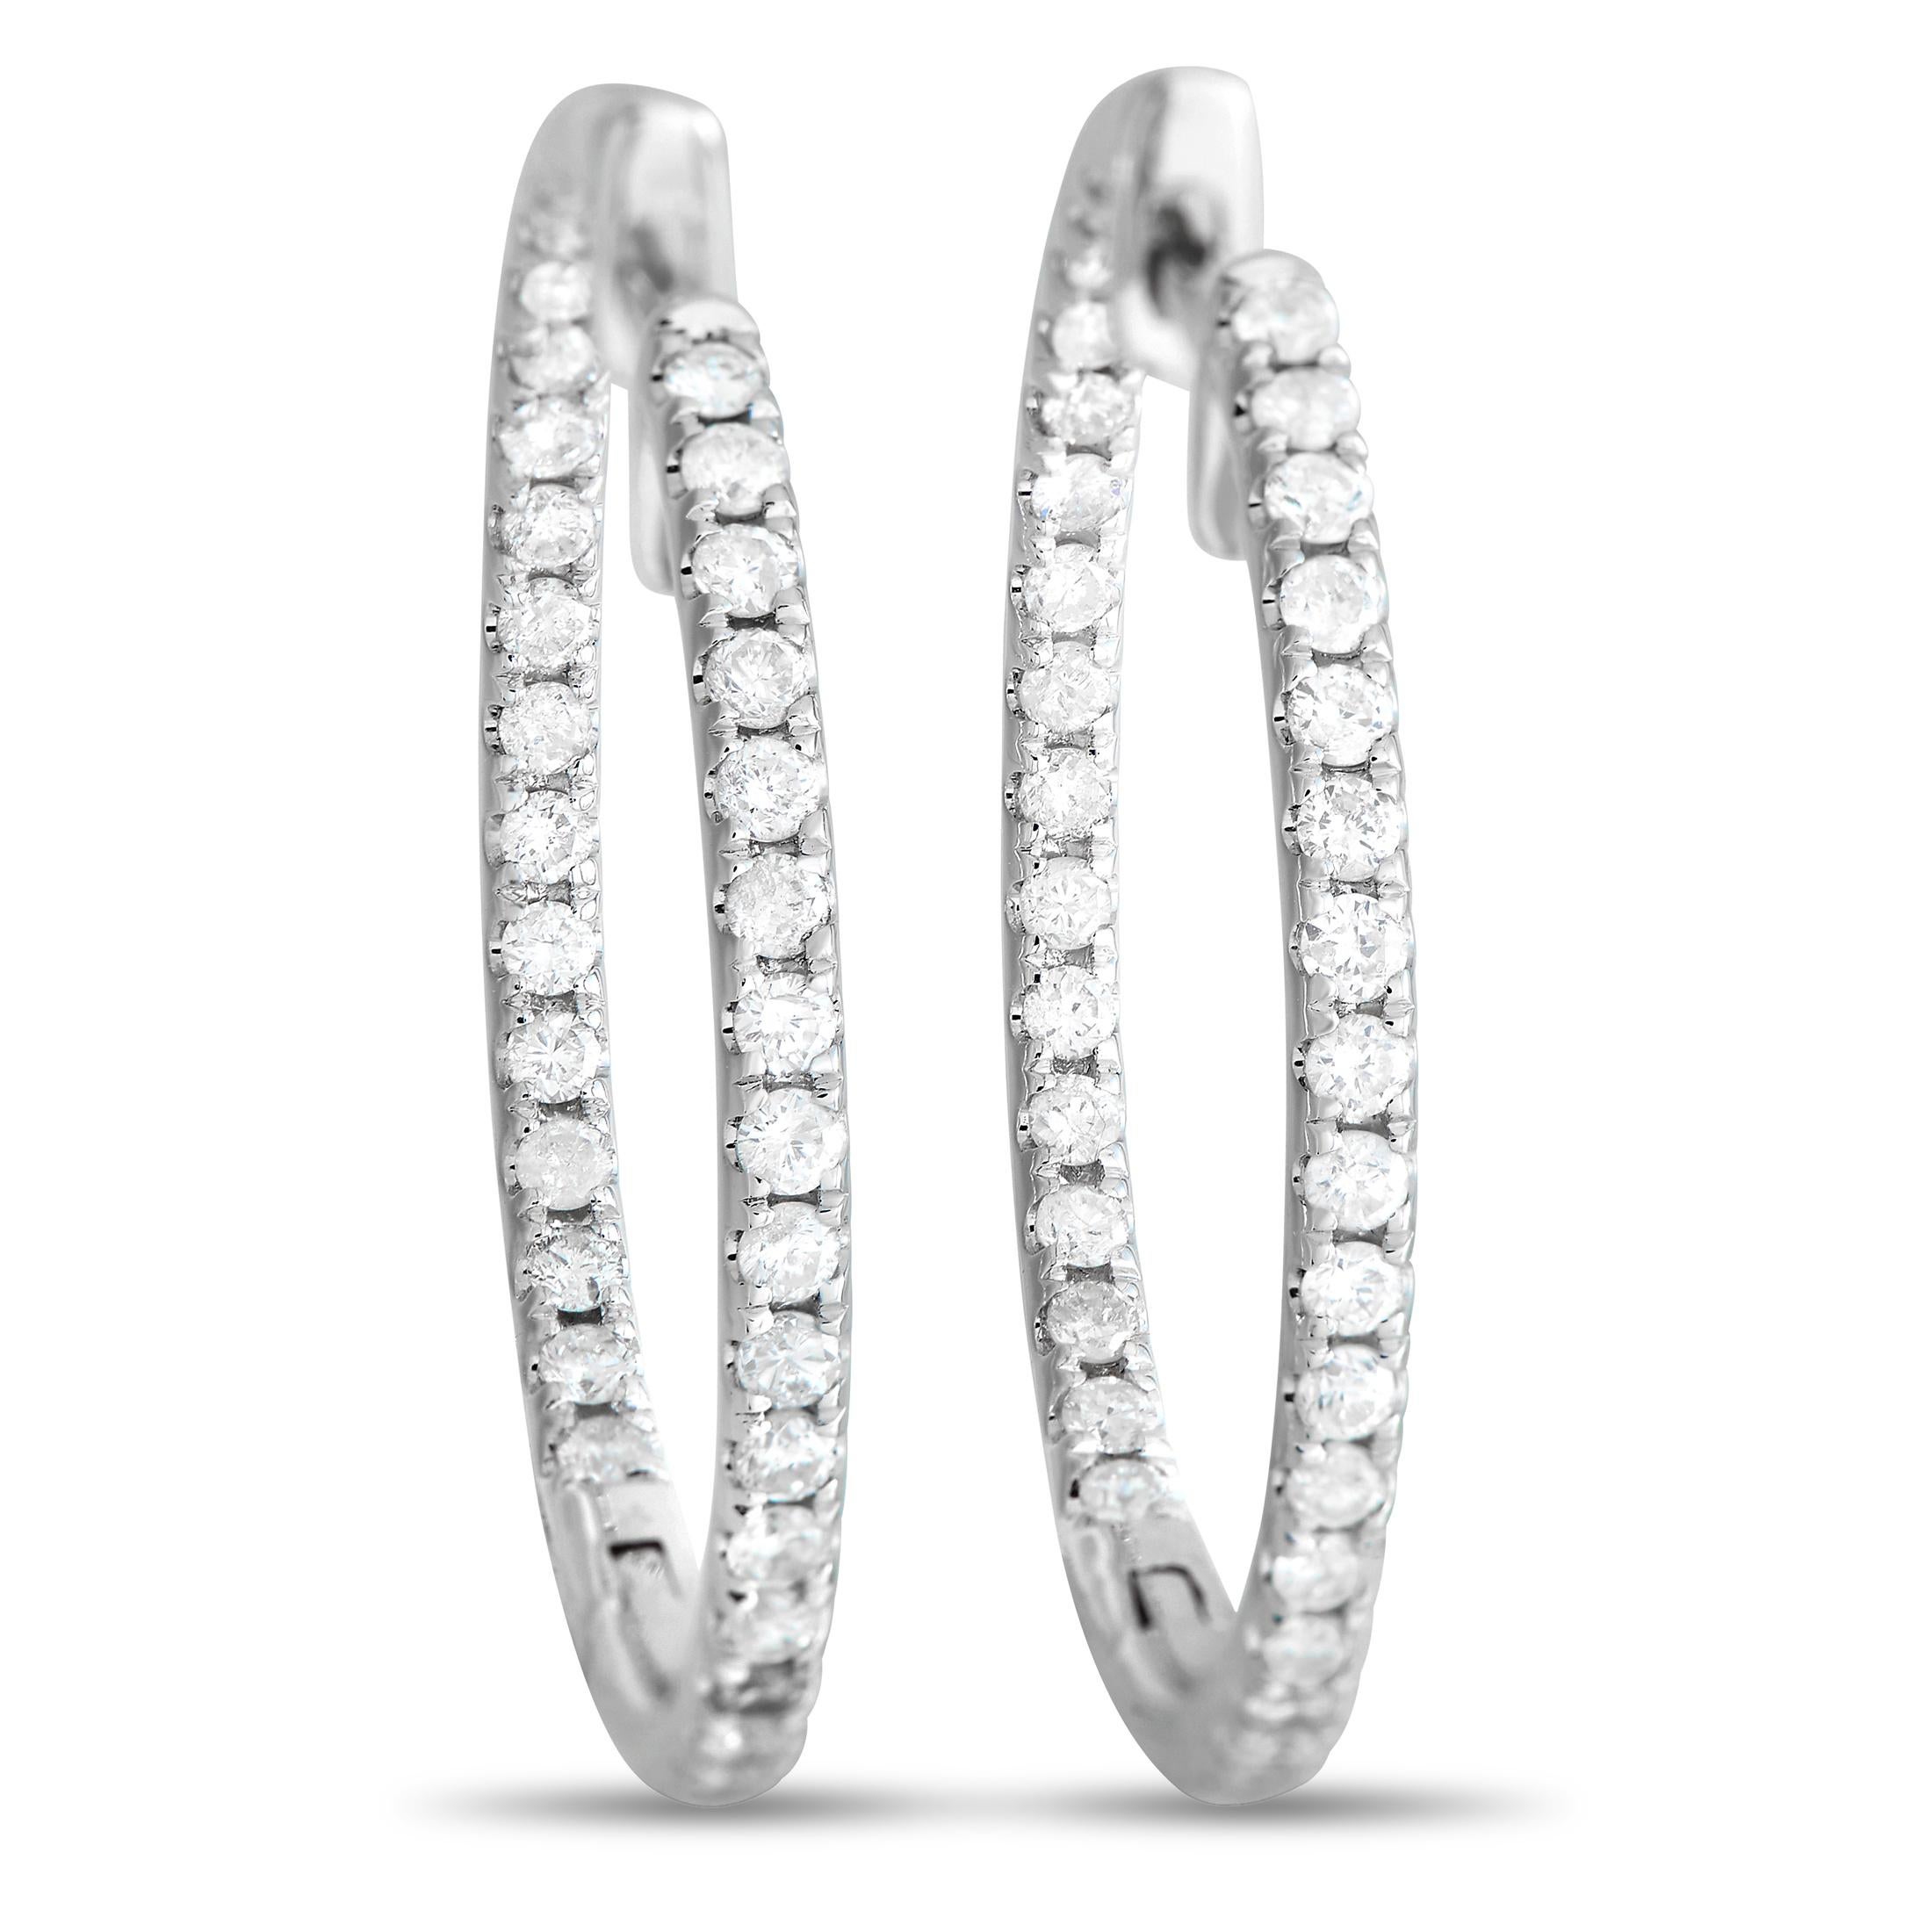 LB Exclusive 14k White Gold 1.0 Carat Diamond Inside-Out Hoop Earrings In New Condition For Sale In Southampton, PA